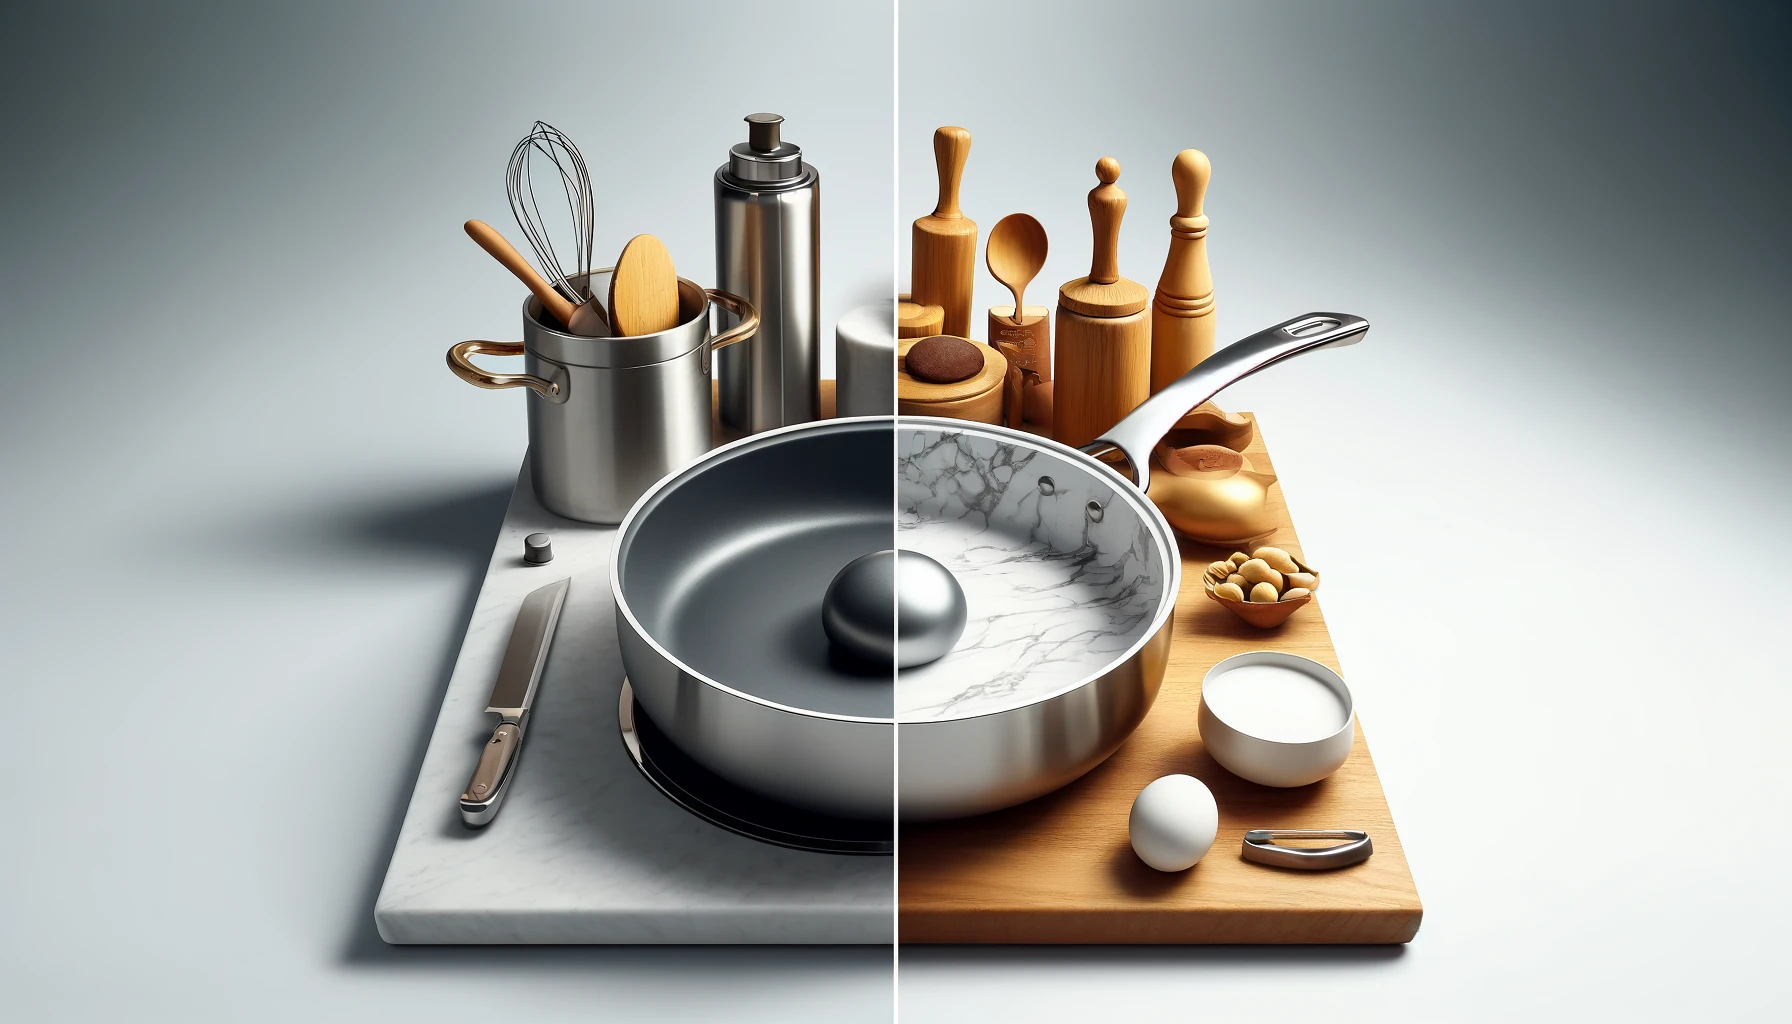 Non-Stick vs. Marble Coating: Which One to Choose?